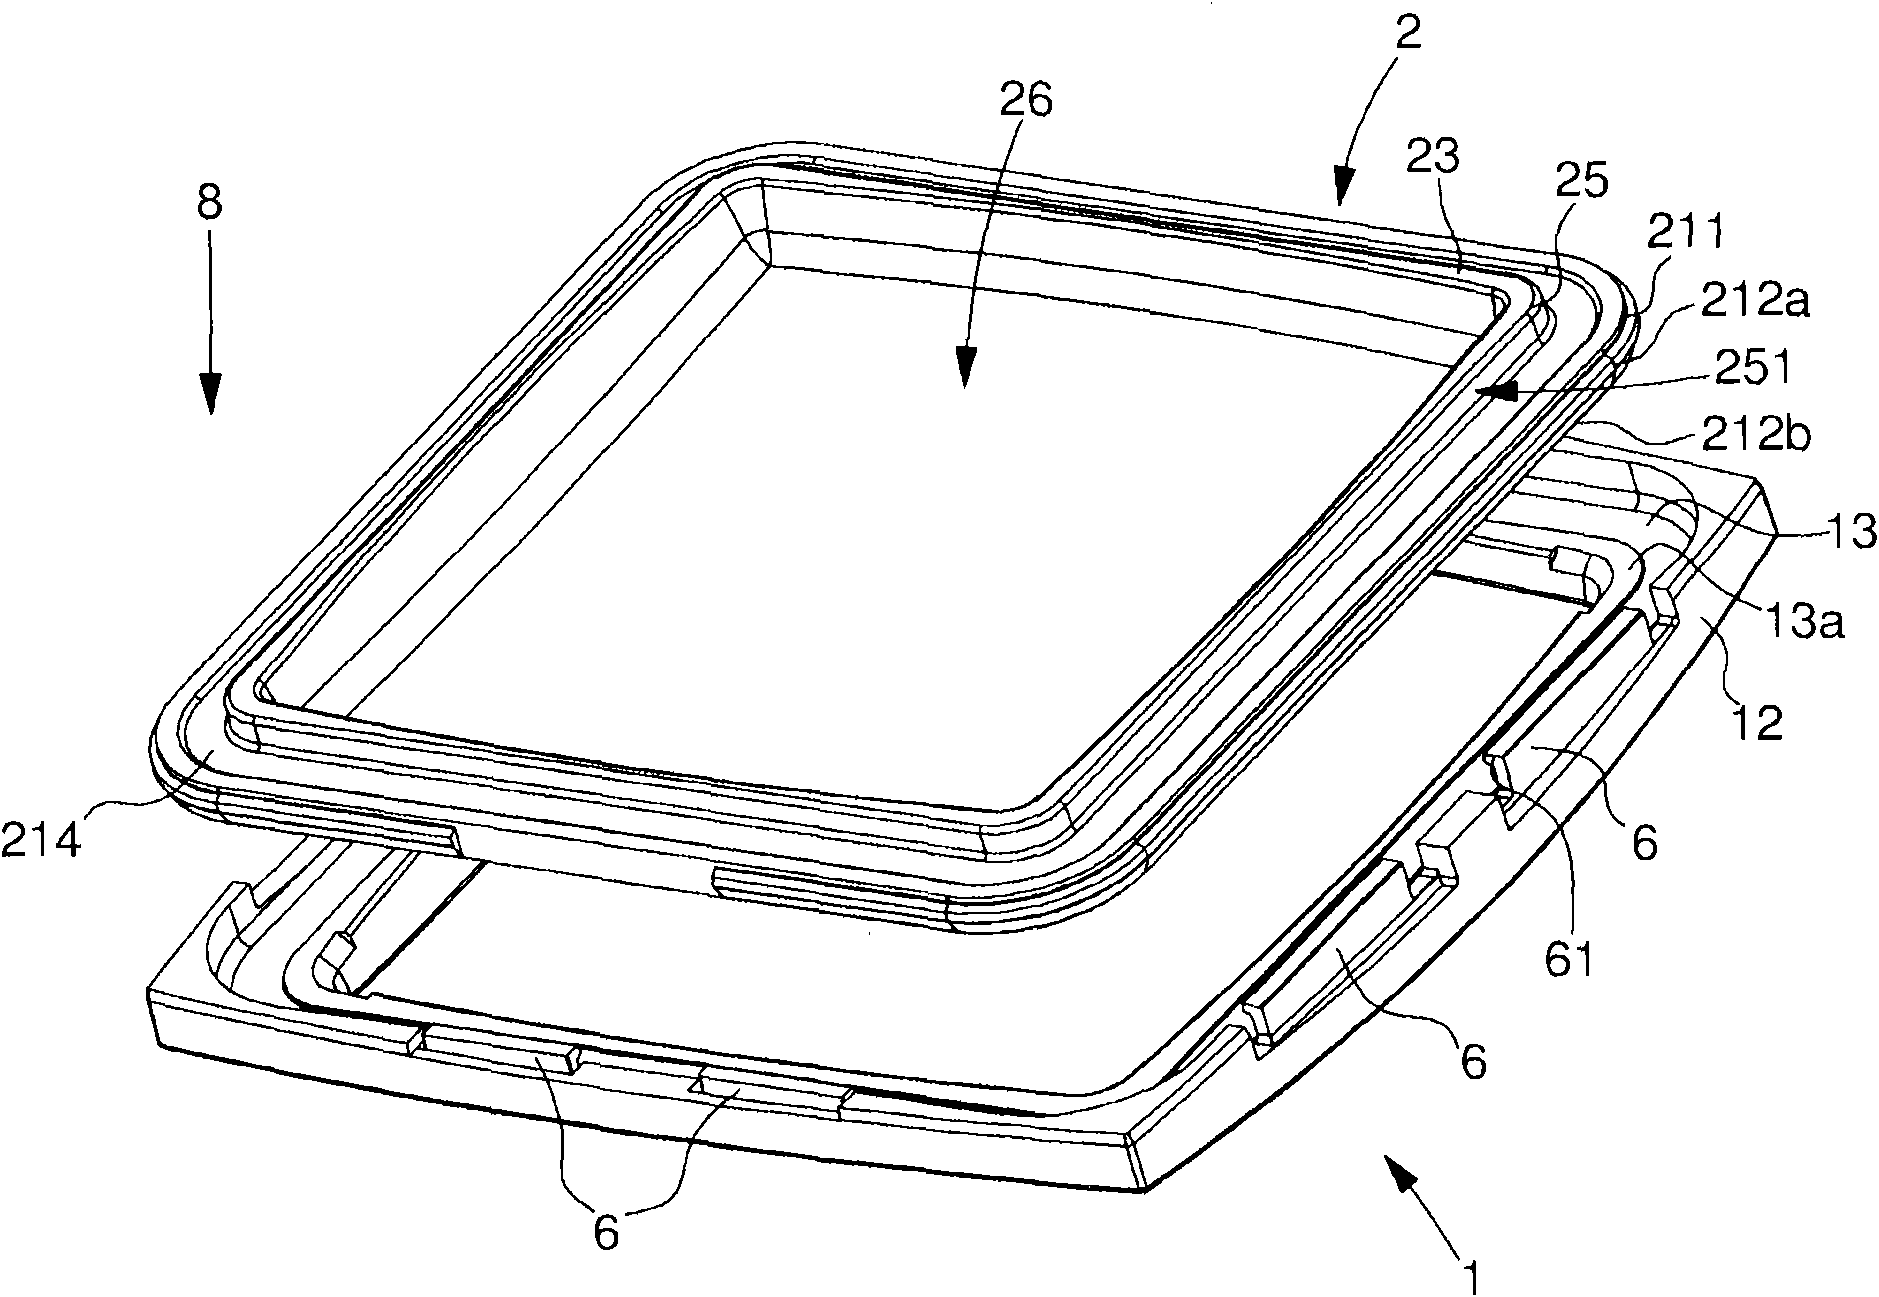 Method and device for fixing a sheet of glass with counter-blade